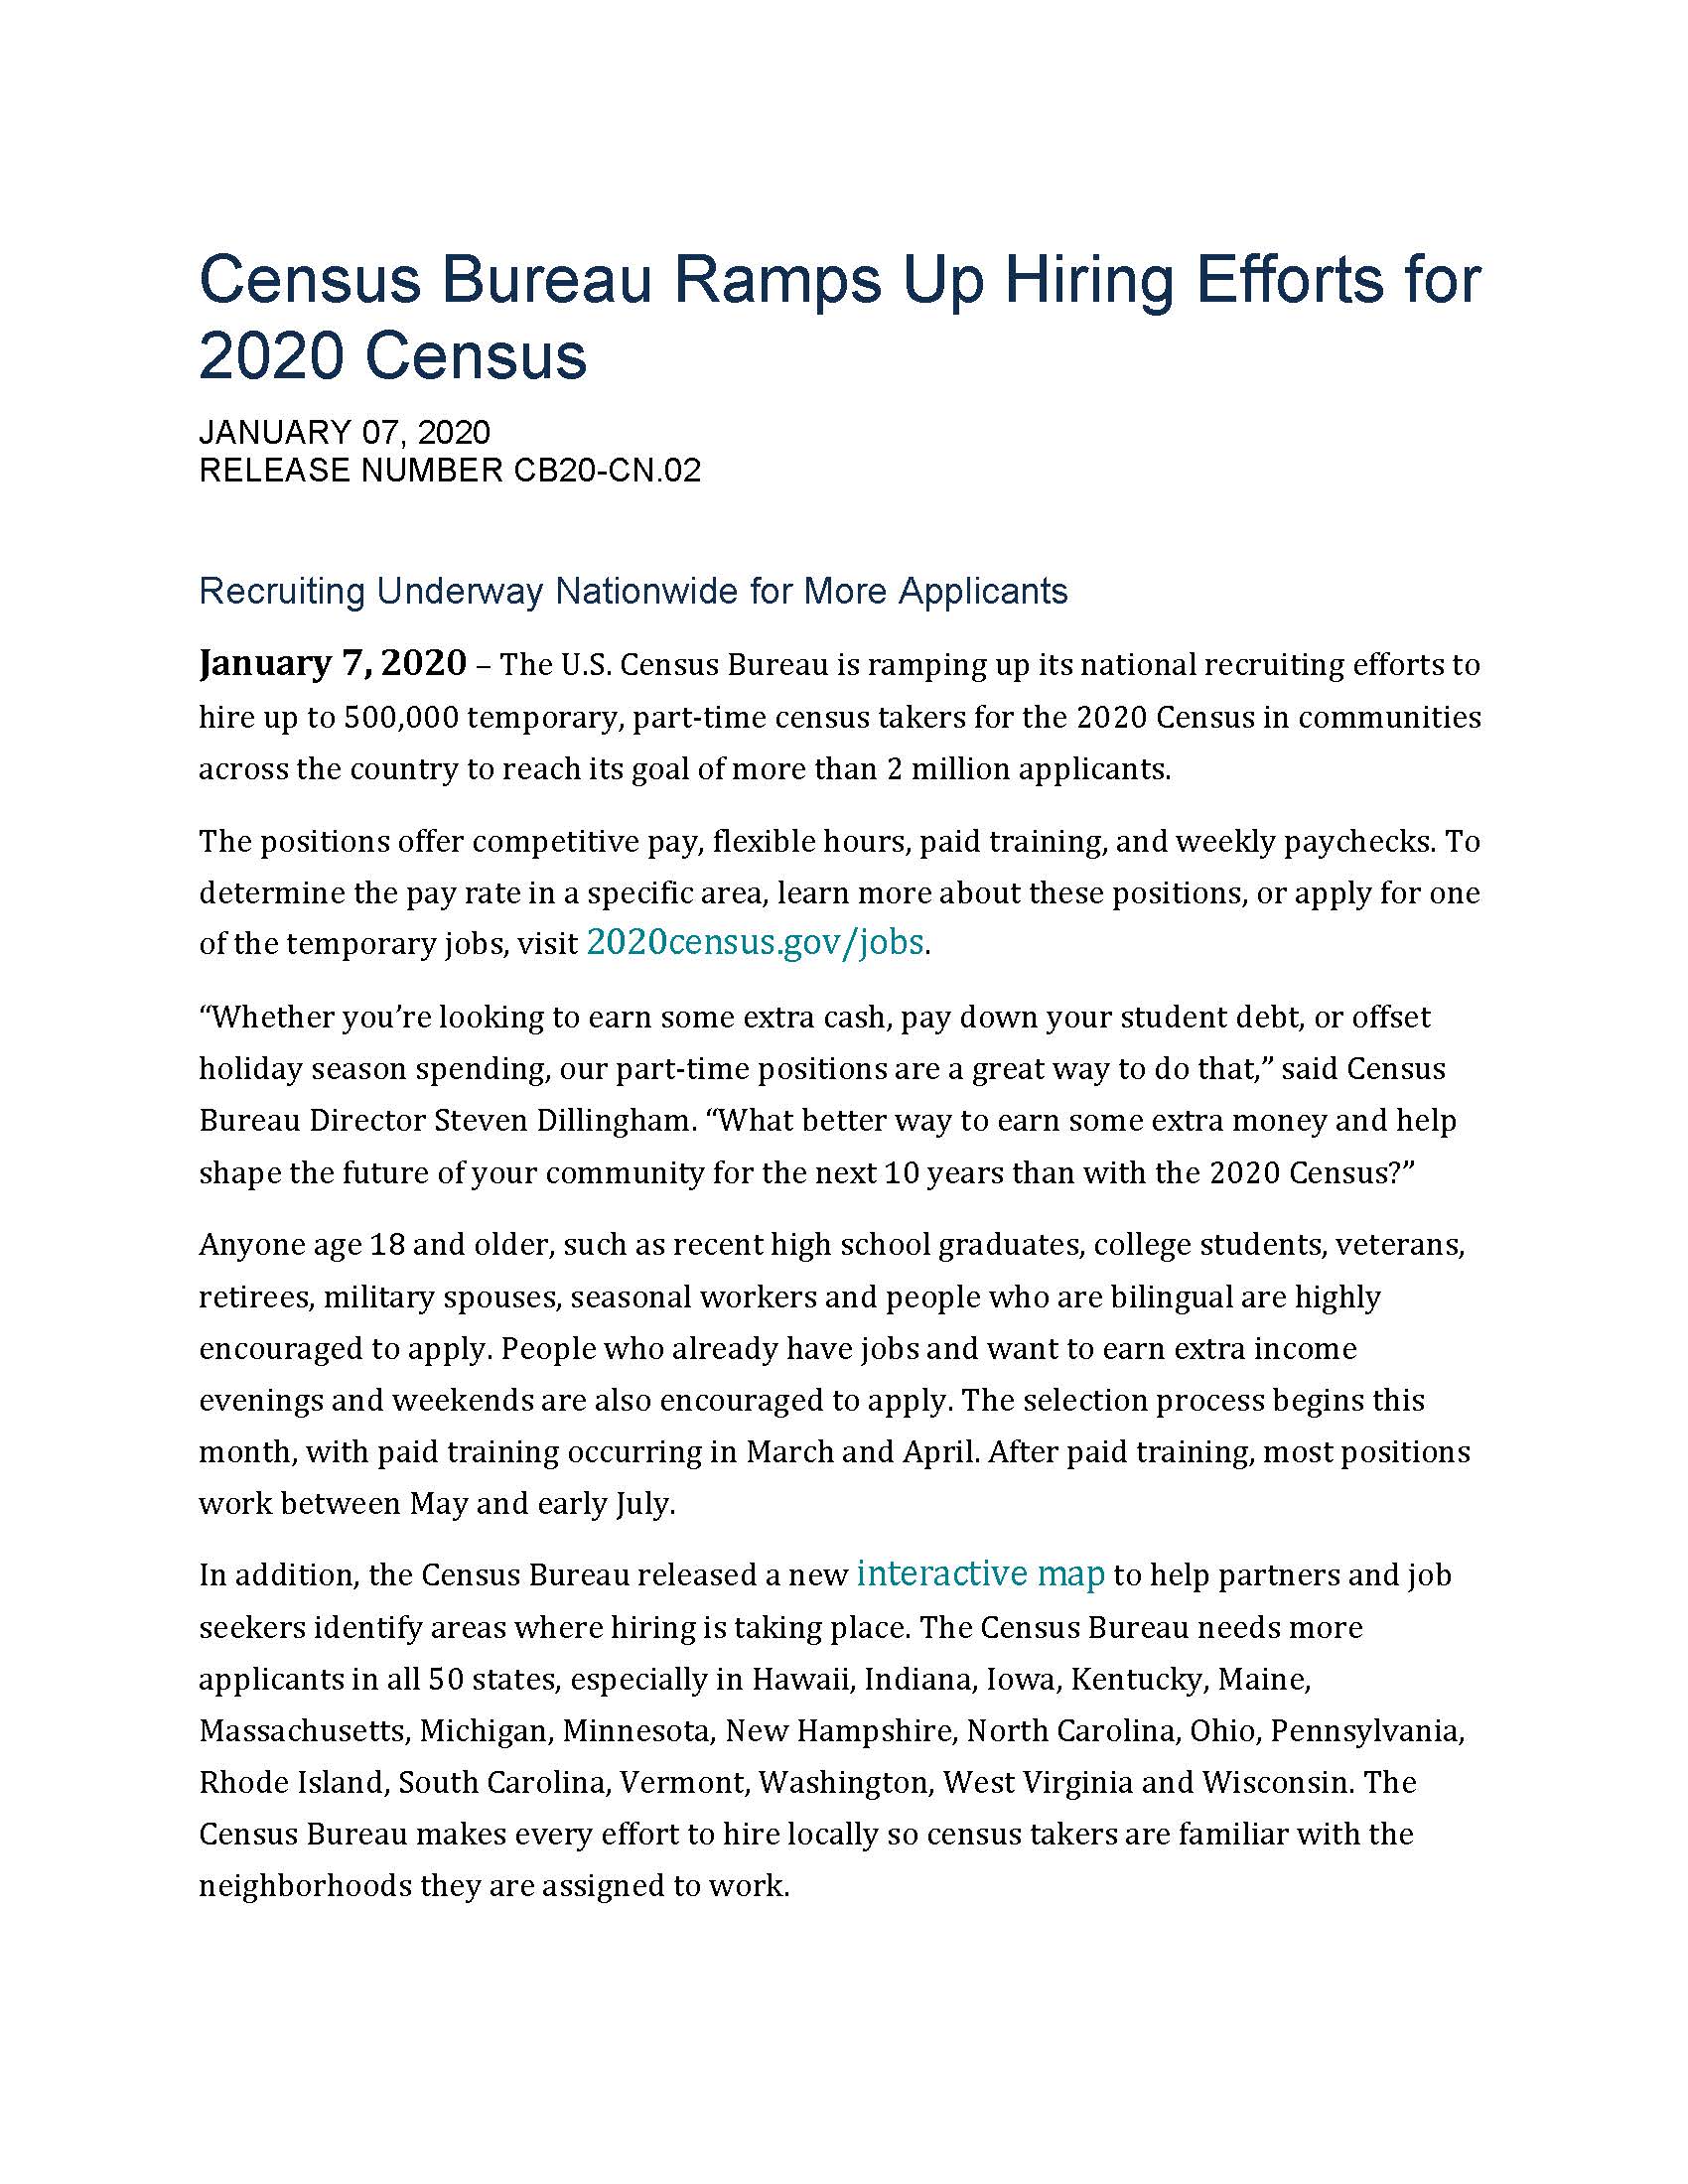 Census Bureau Ramps Up Hiring Efforts for 2020 Census_Page_1